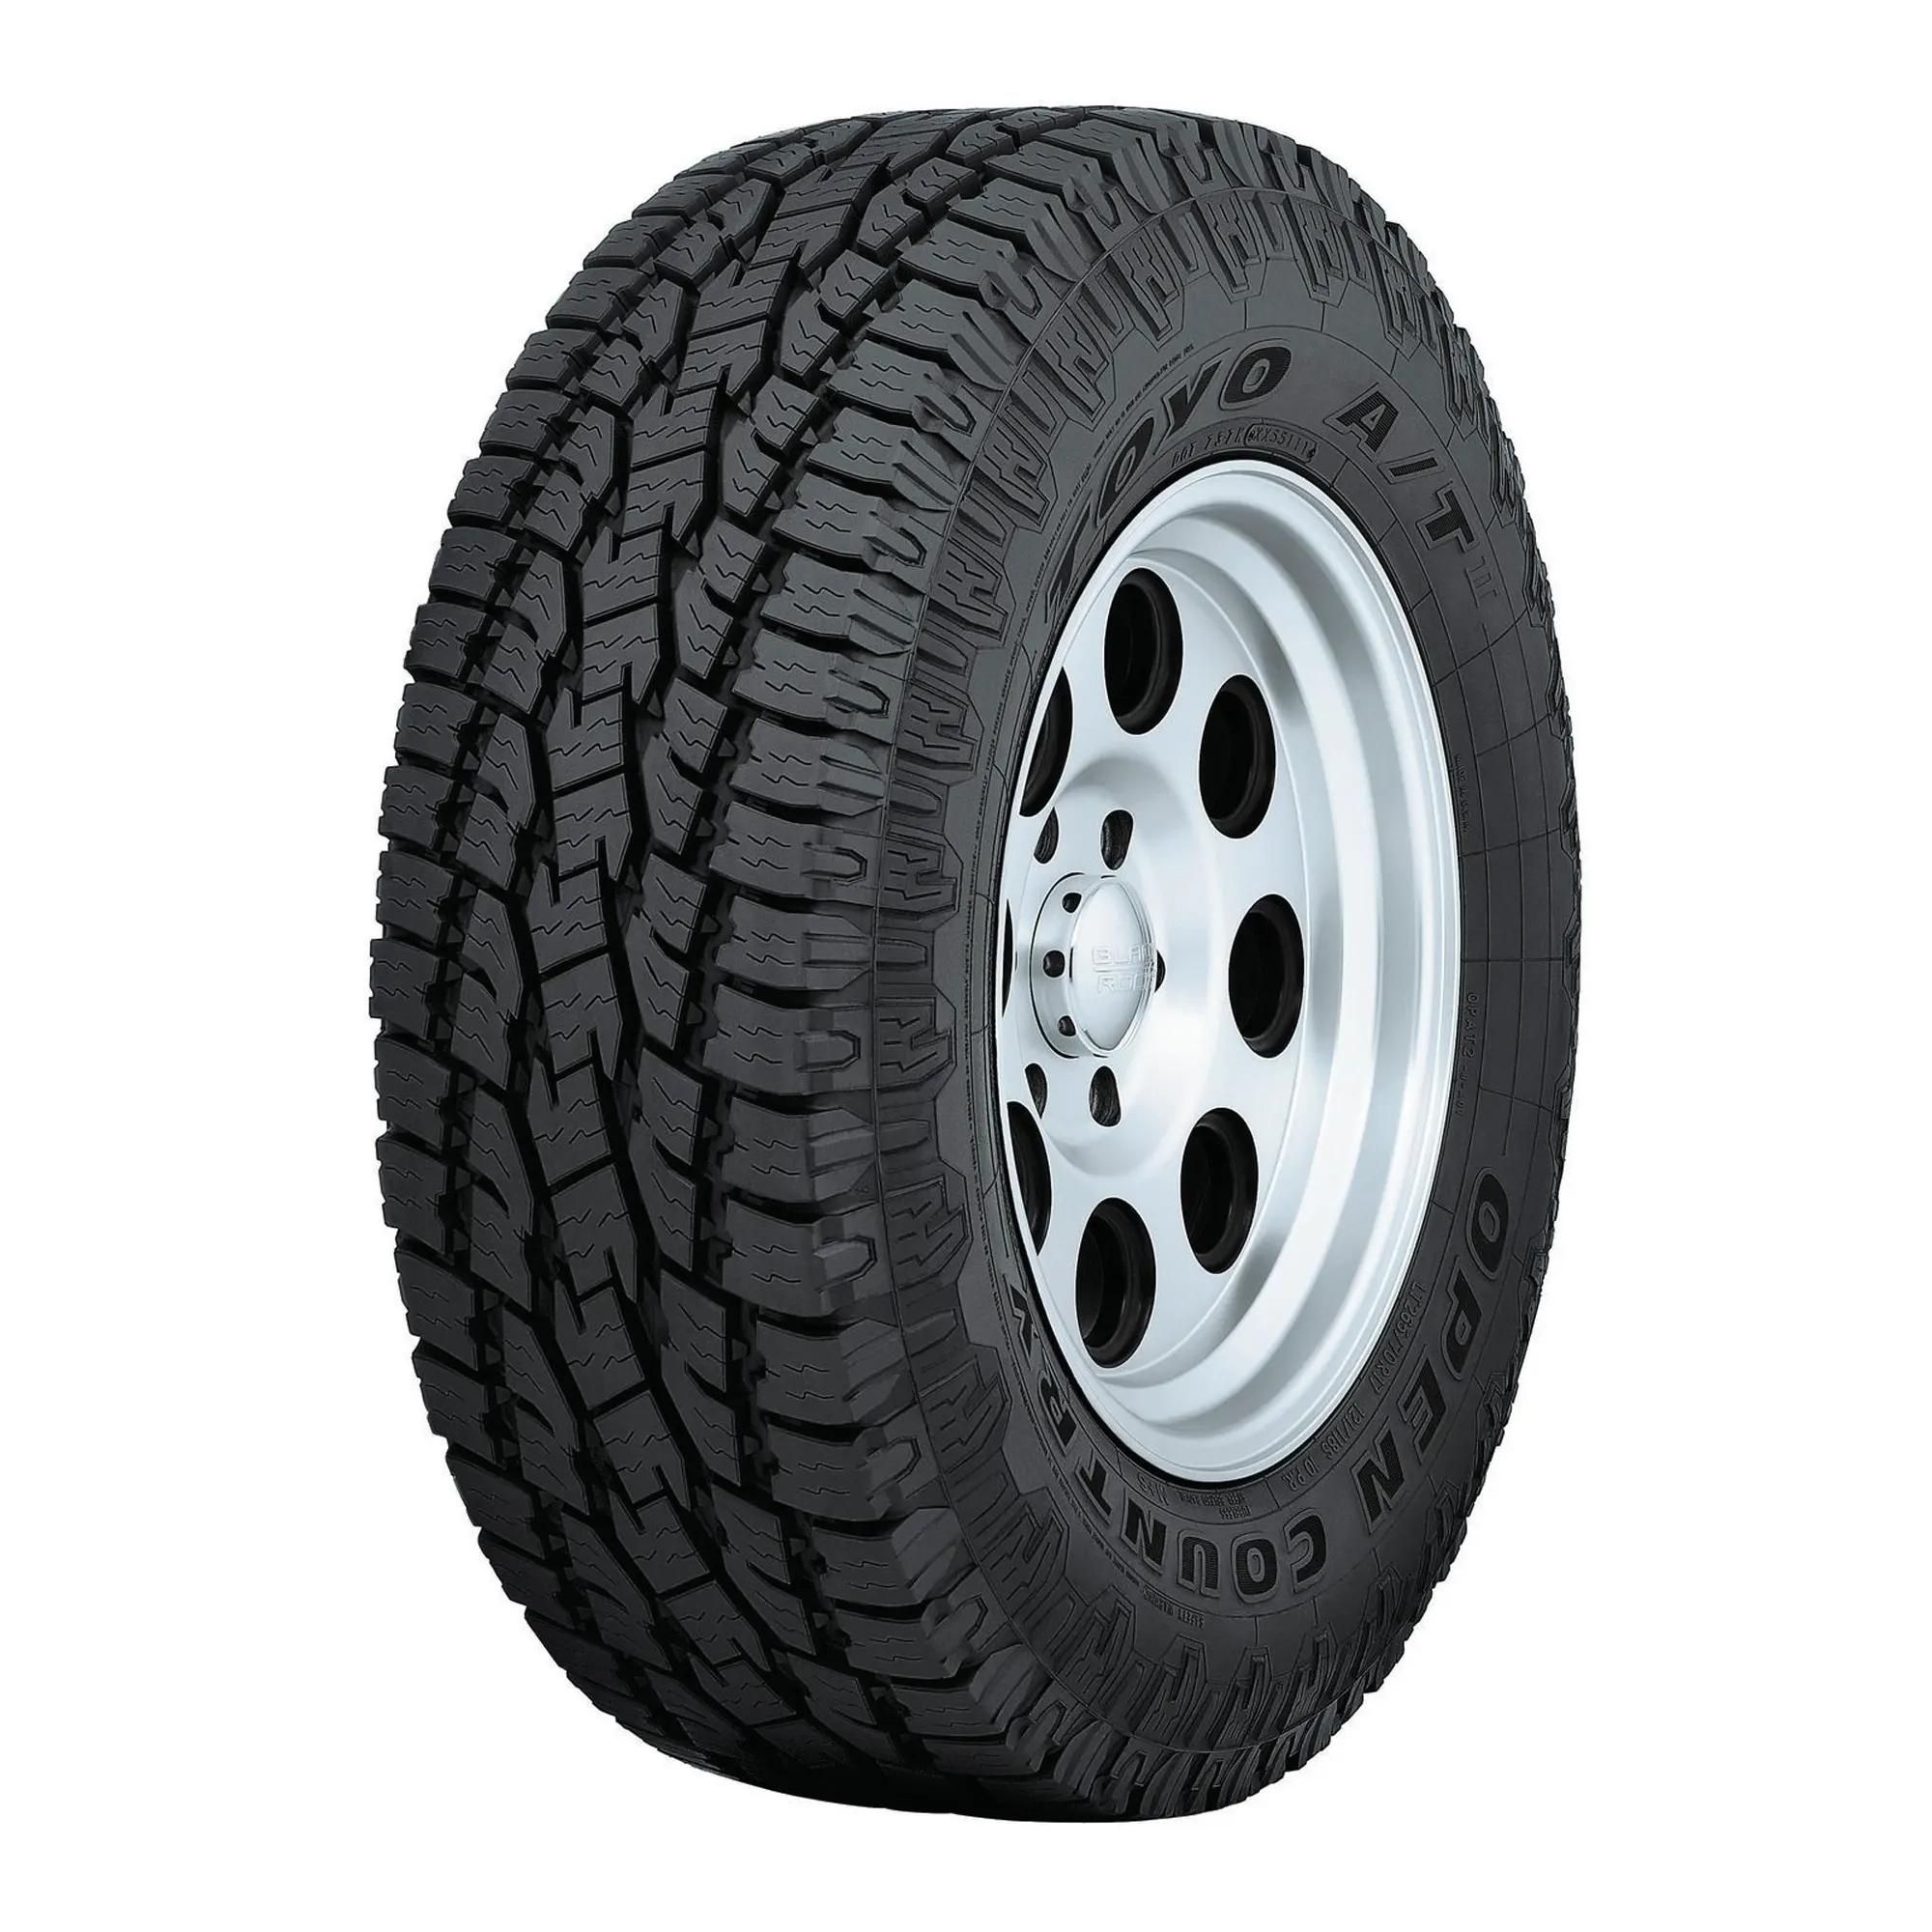 Шина 275/45R20 110H Open Country A/T Plus XL